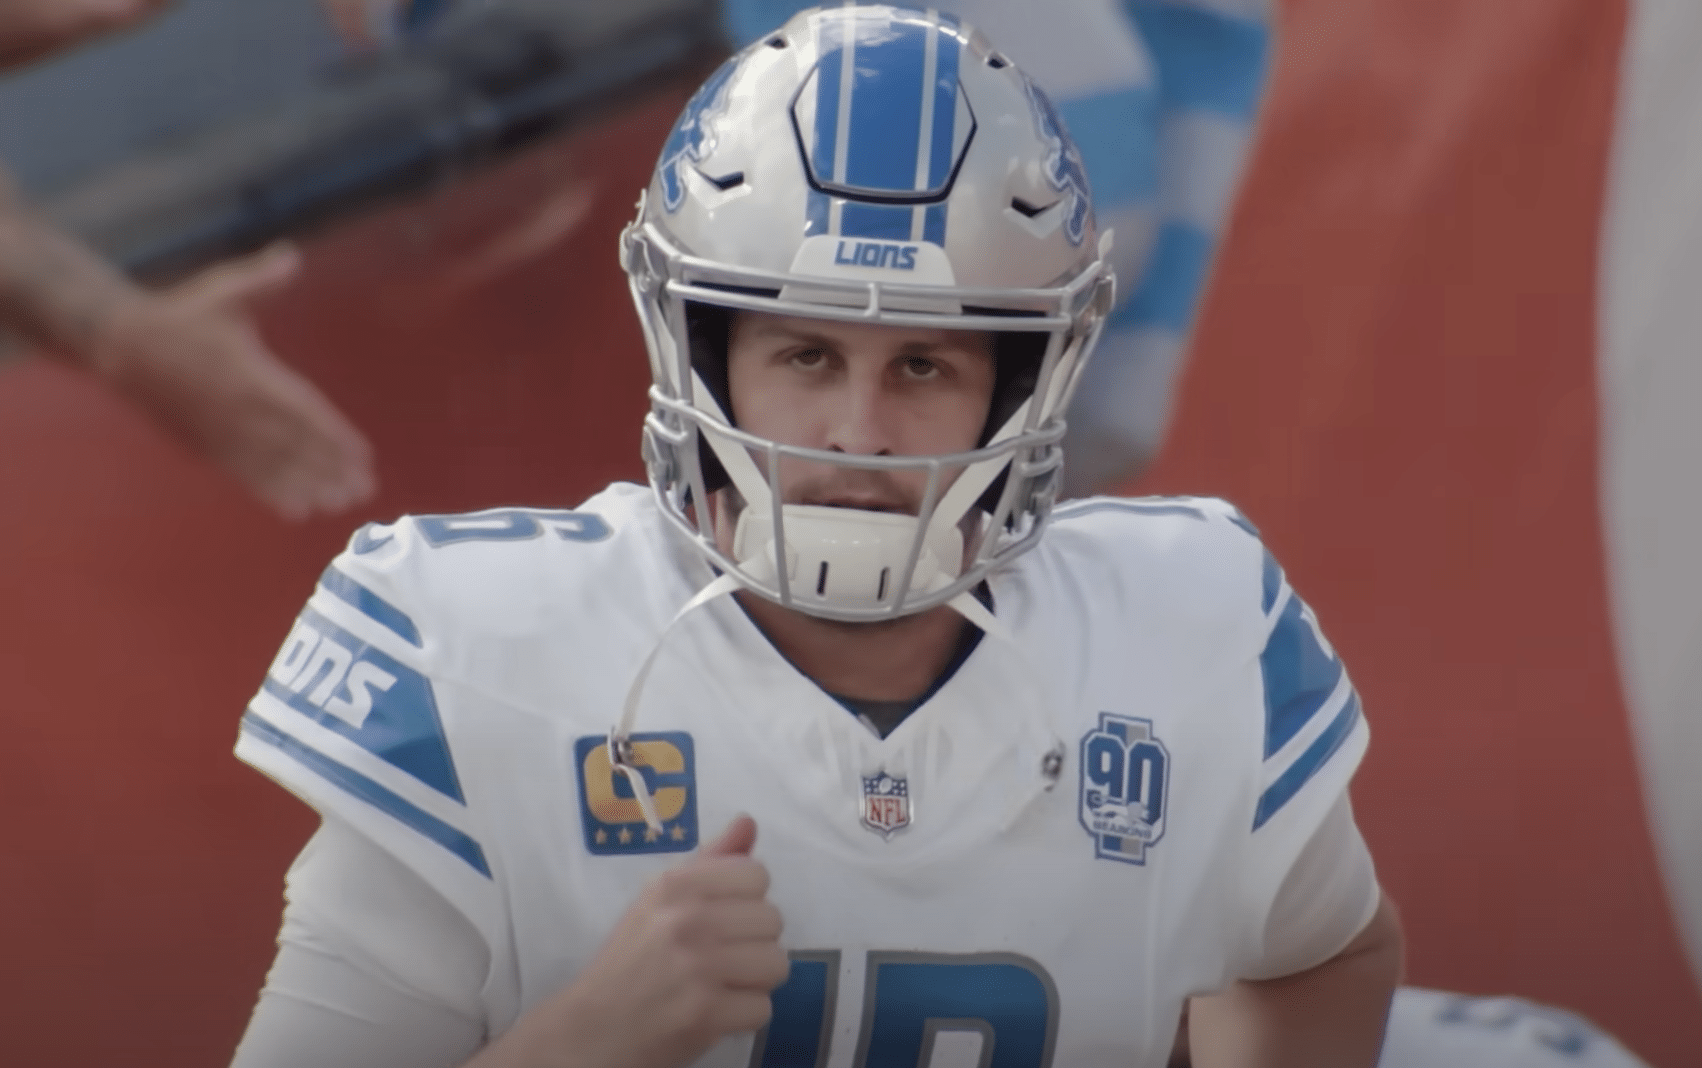 Detroit Lions starting offense Jared Goff Pro Football Focus Grade Detroit Lions PFF grades vs. Chargers Detroit Lions starting offense Jared Goff on balling out Jared Goff says Detroit Lions are not satisfied Jared Goff shares thoughts